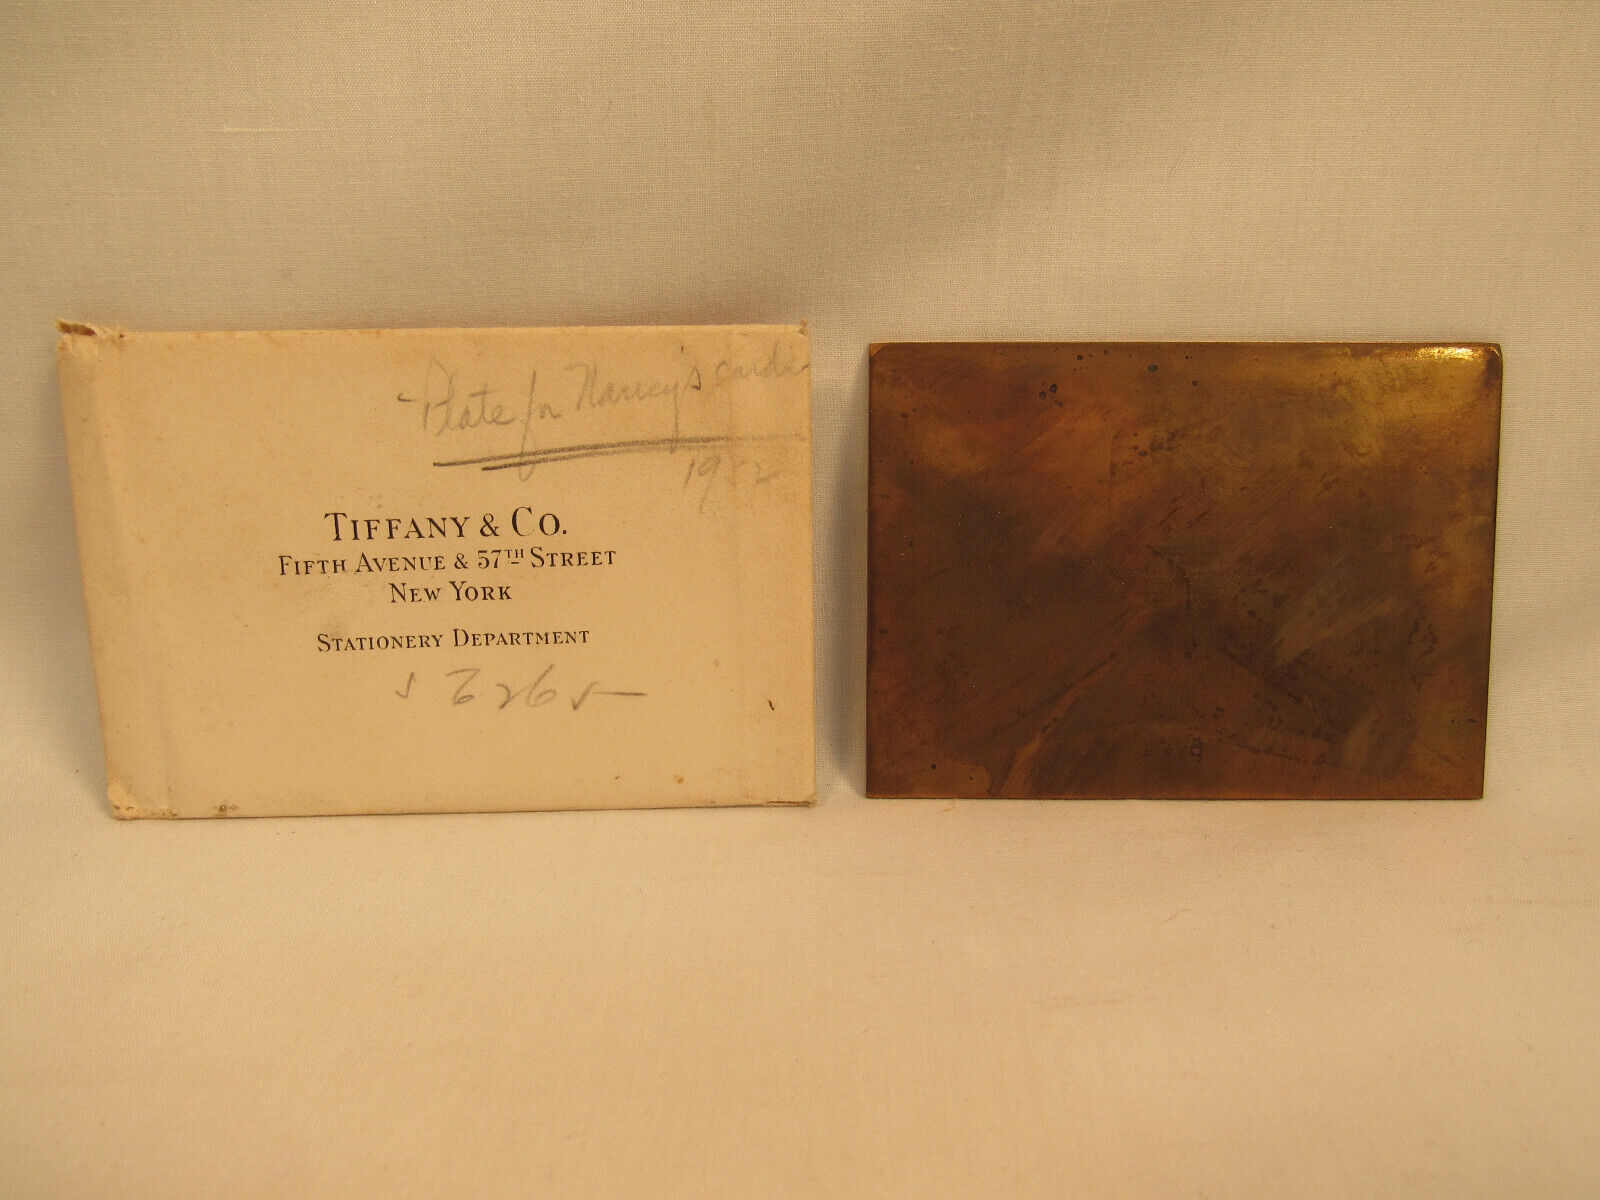 Vintage Tiffany & Co. Stationery Department Copper Printing Plate W/ Envelope A